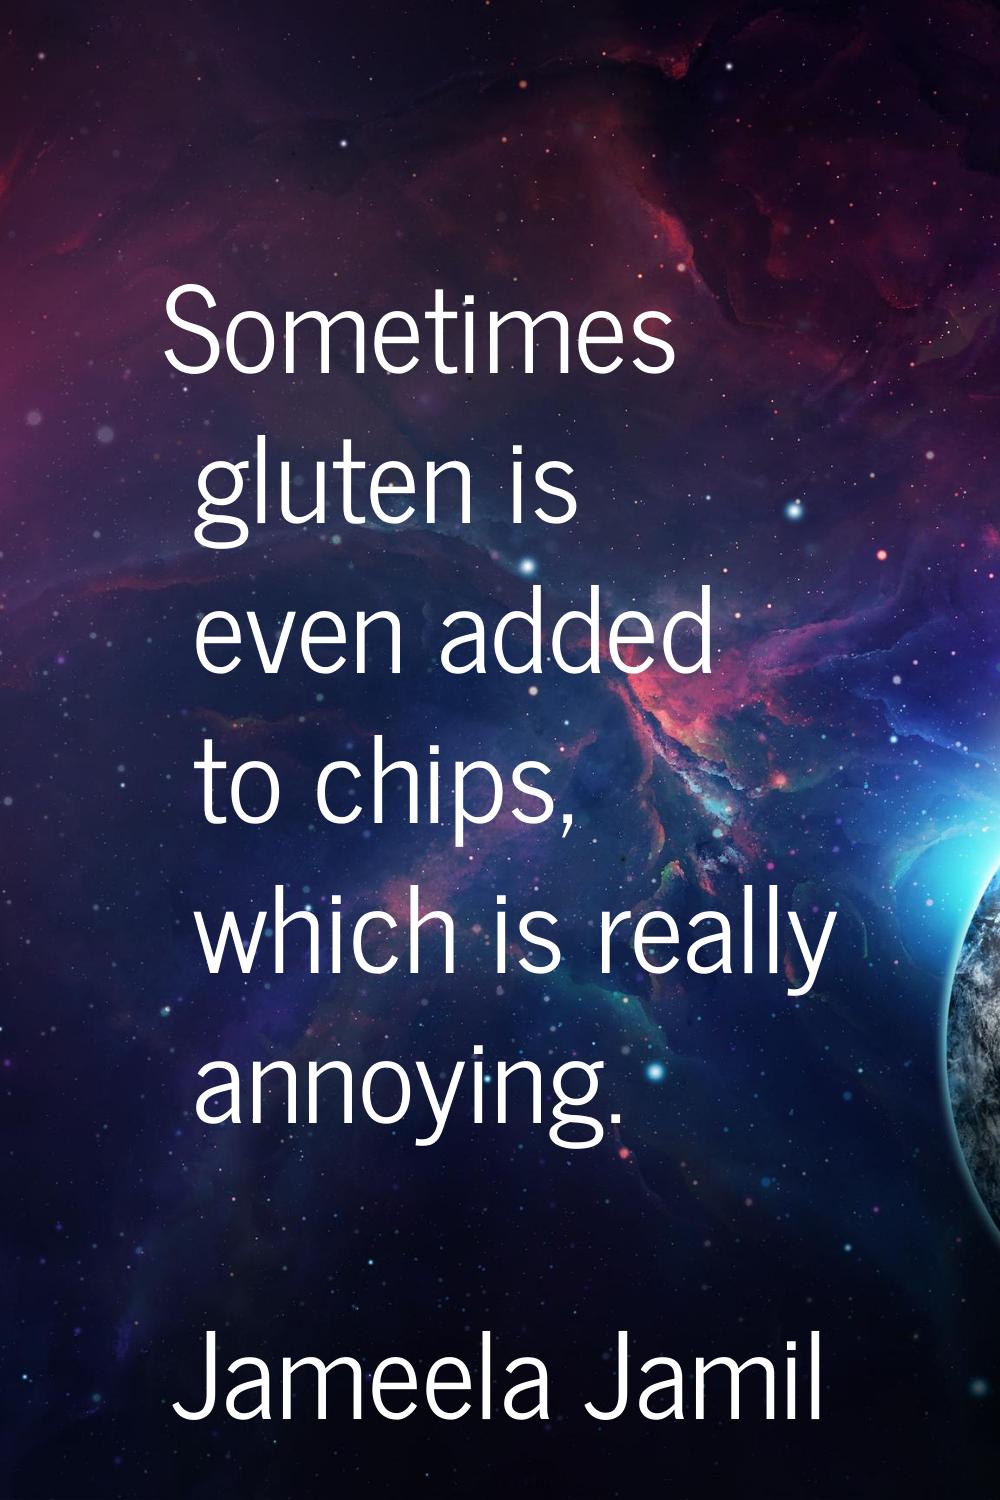 Sometimes gluten is even added to chips, which is really annoying.